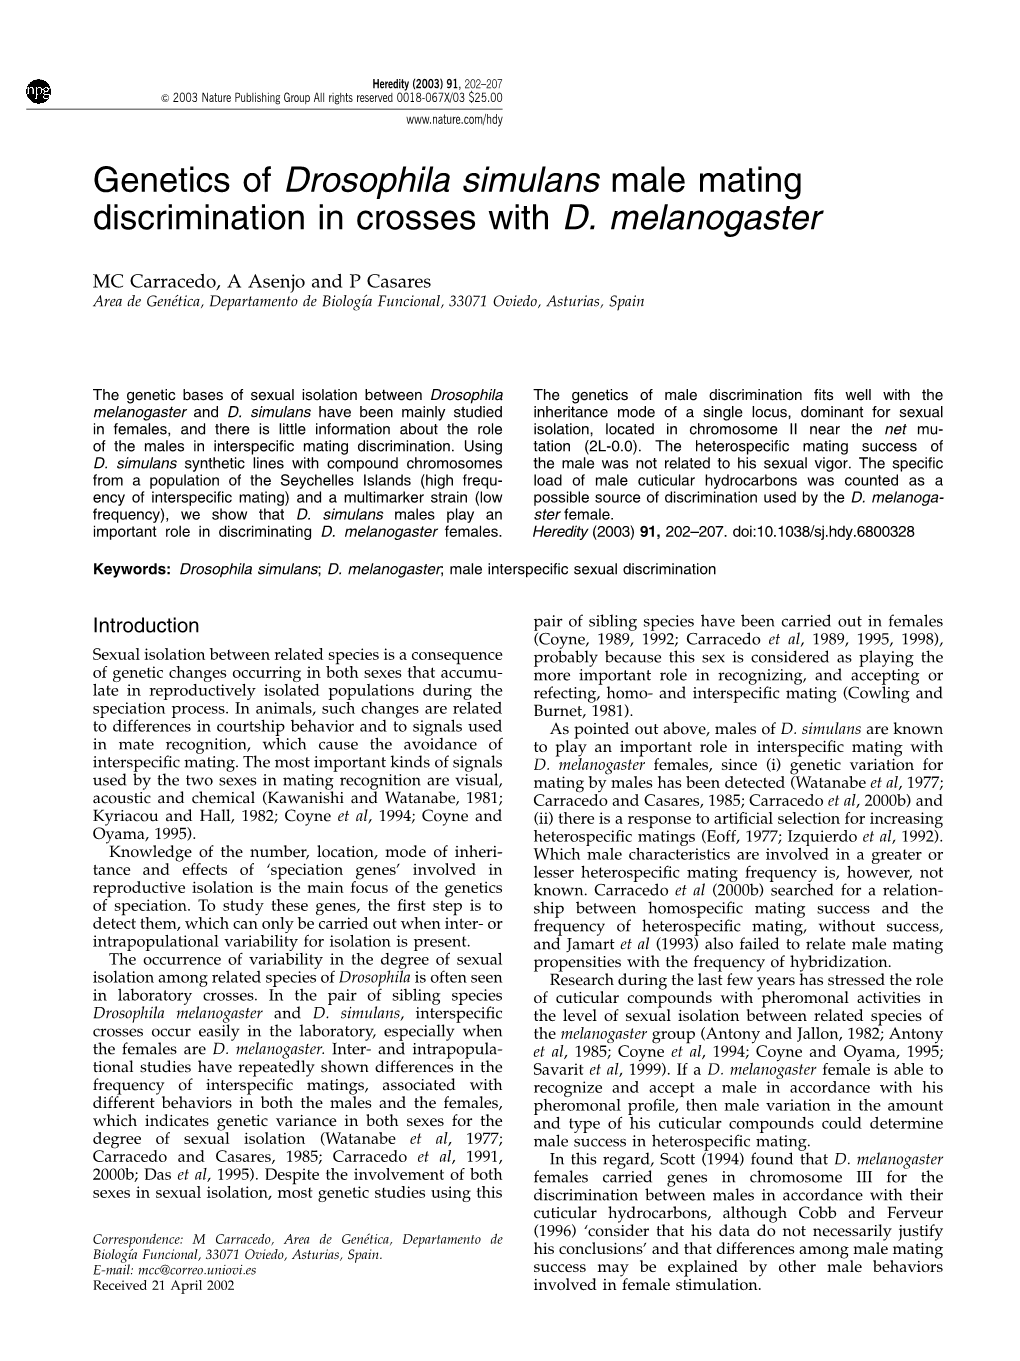 Genetics of Drosophila Simulans Male Mating Discrimination in Crosses with D